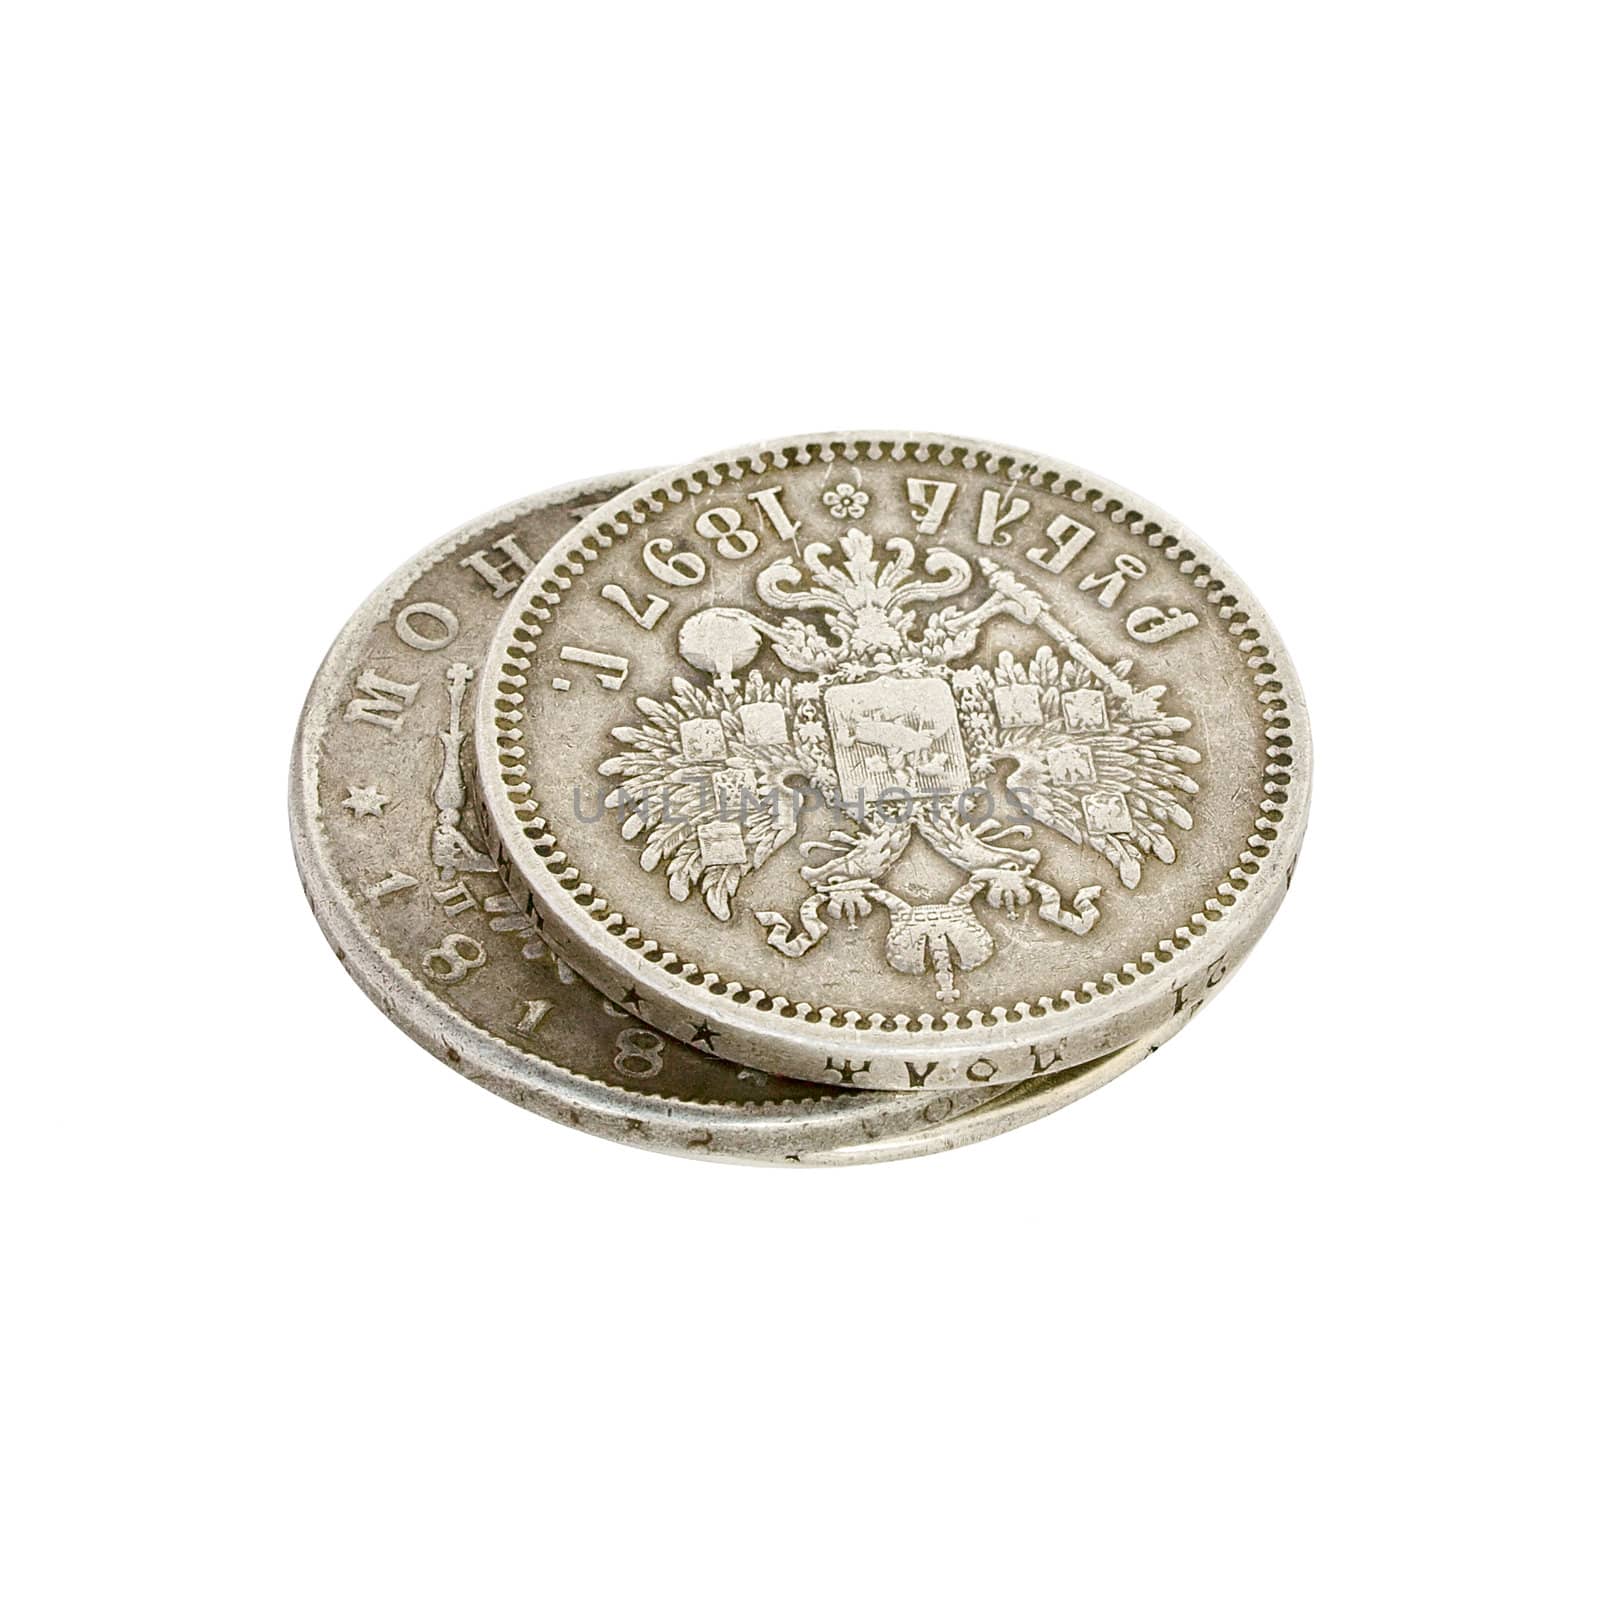 Antique silver Russian coin on the white background